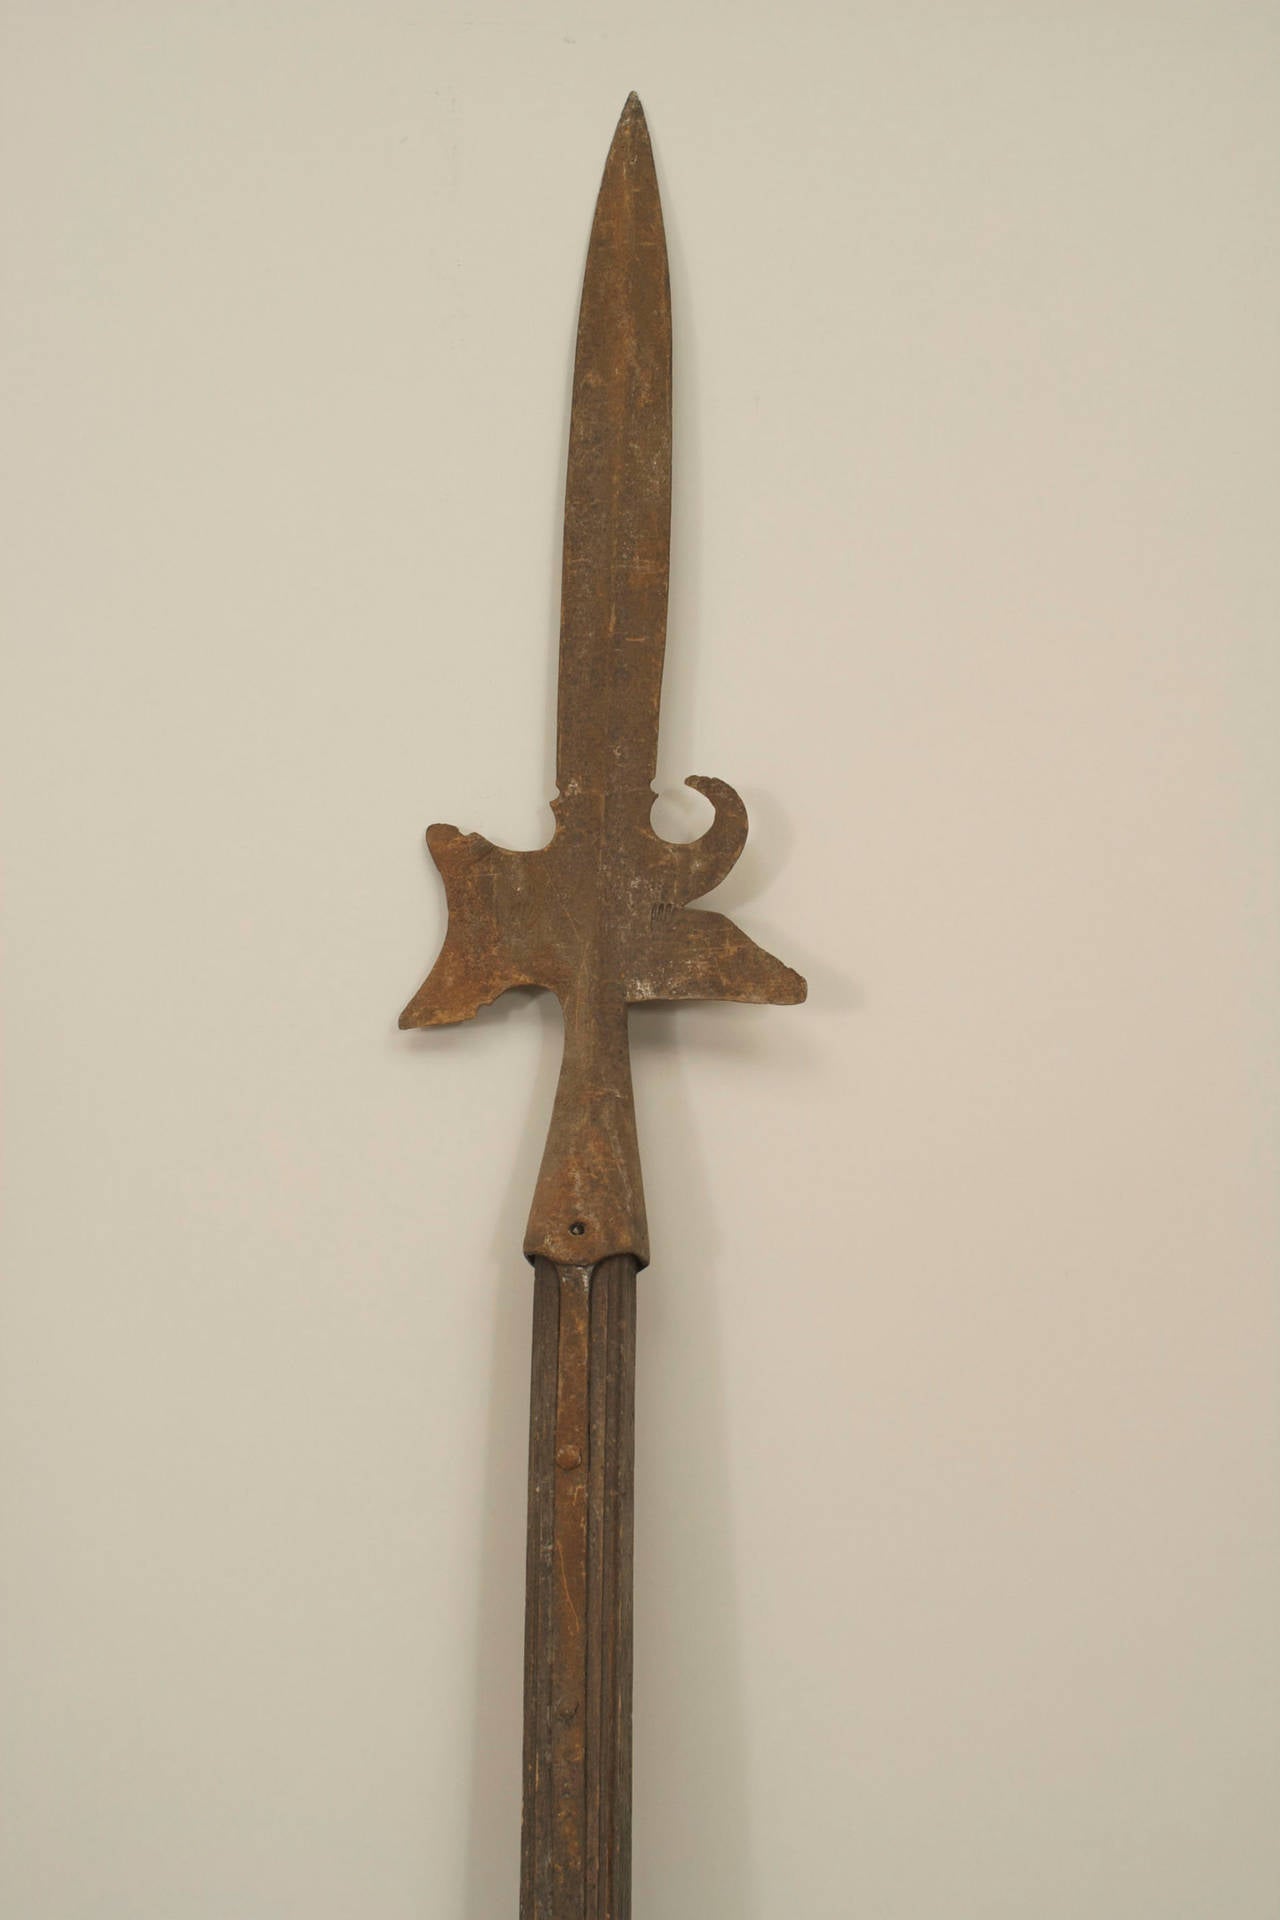 English Renaissance-style spear with crossed leather covered shaft and polished steel blade.
